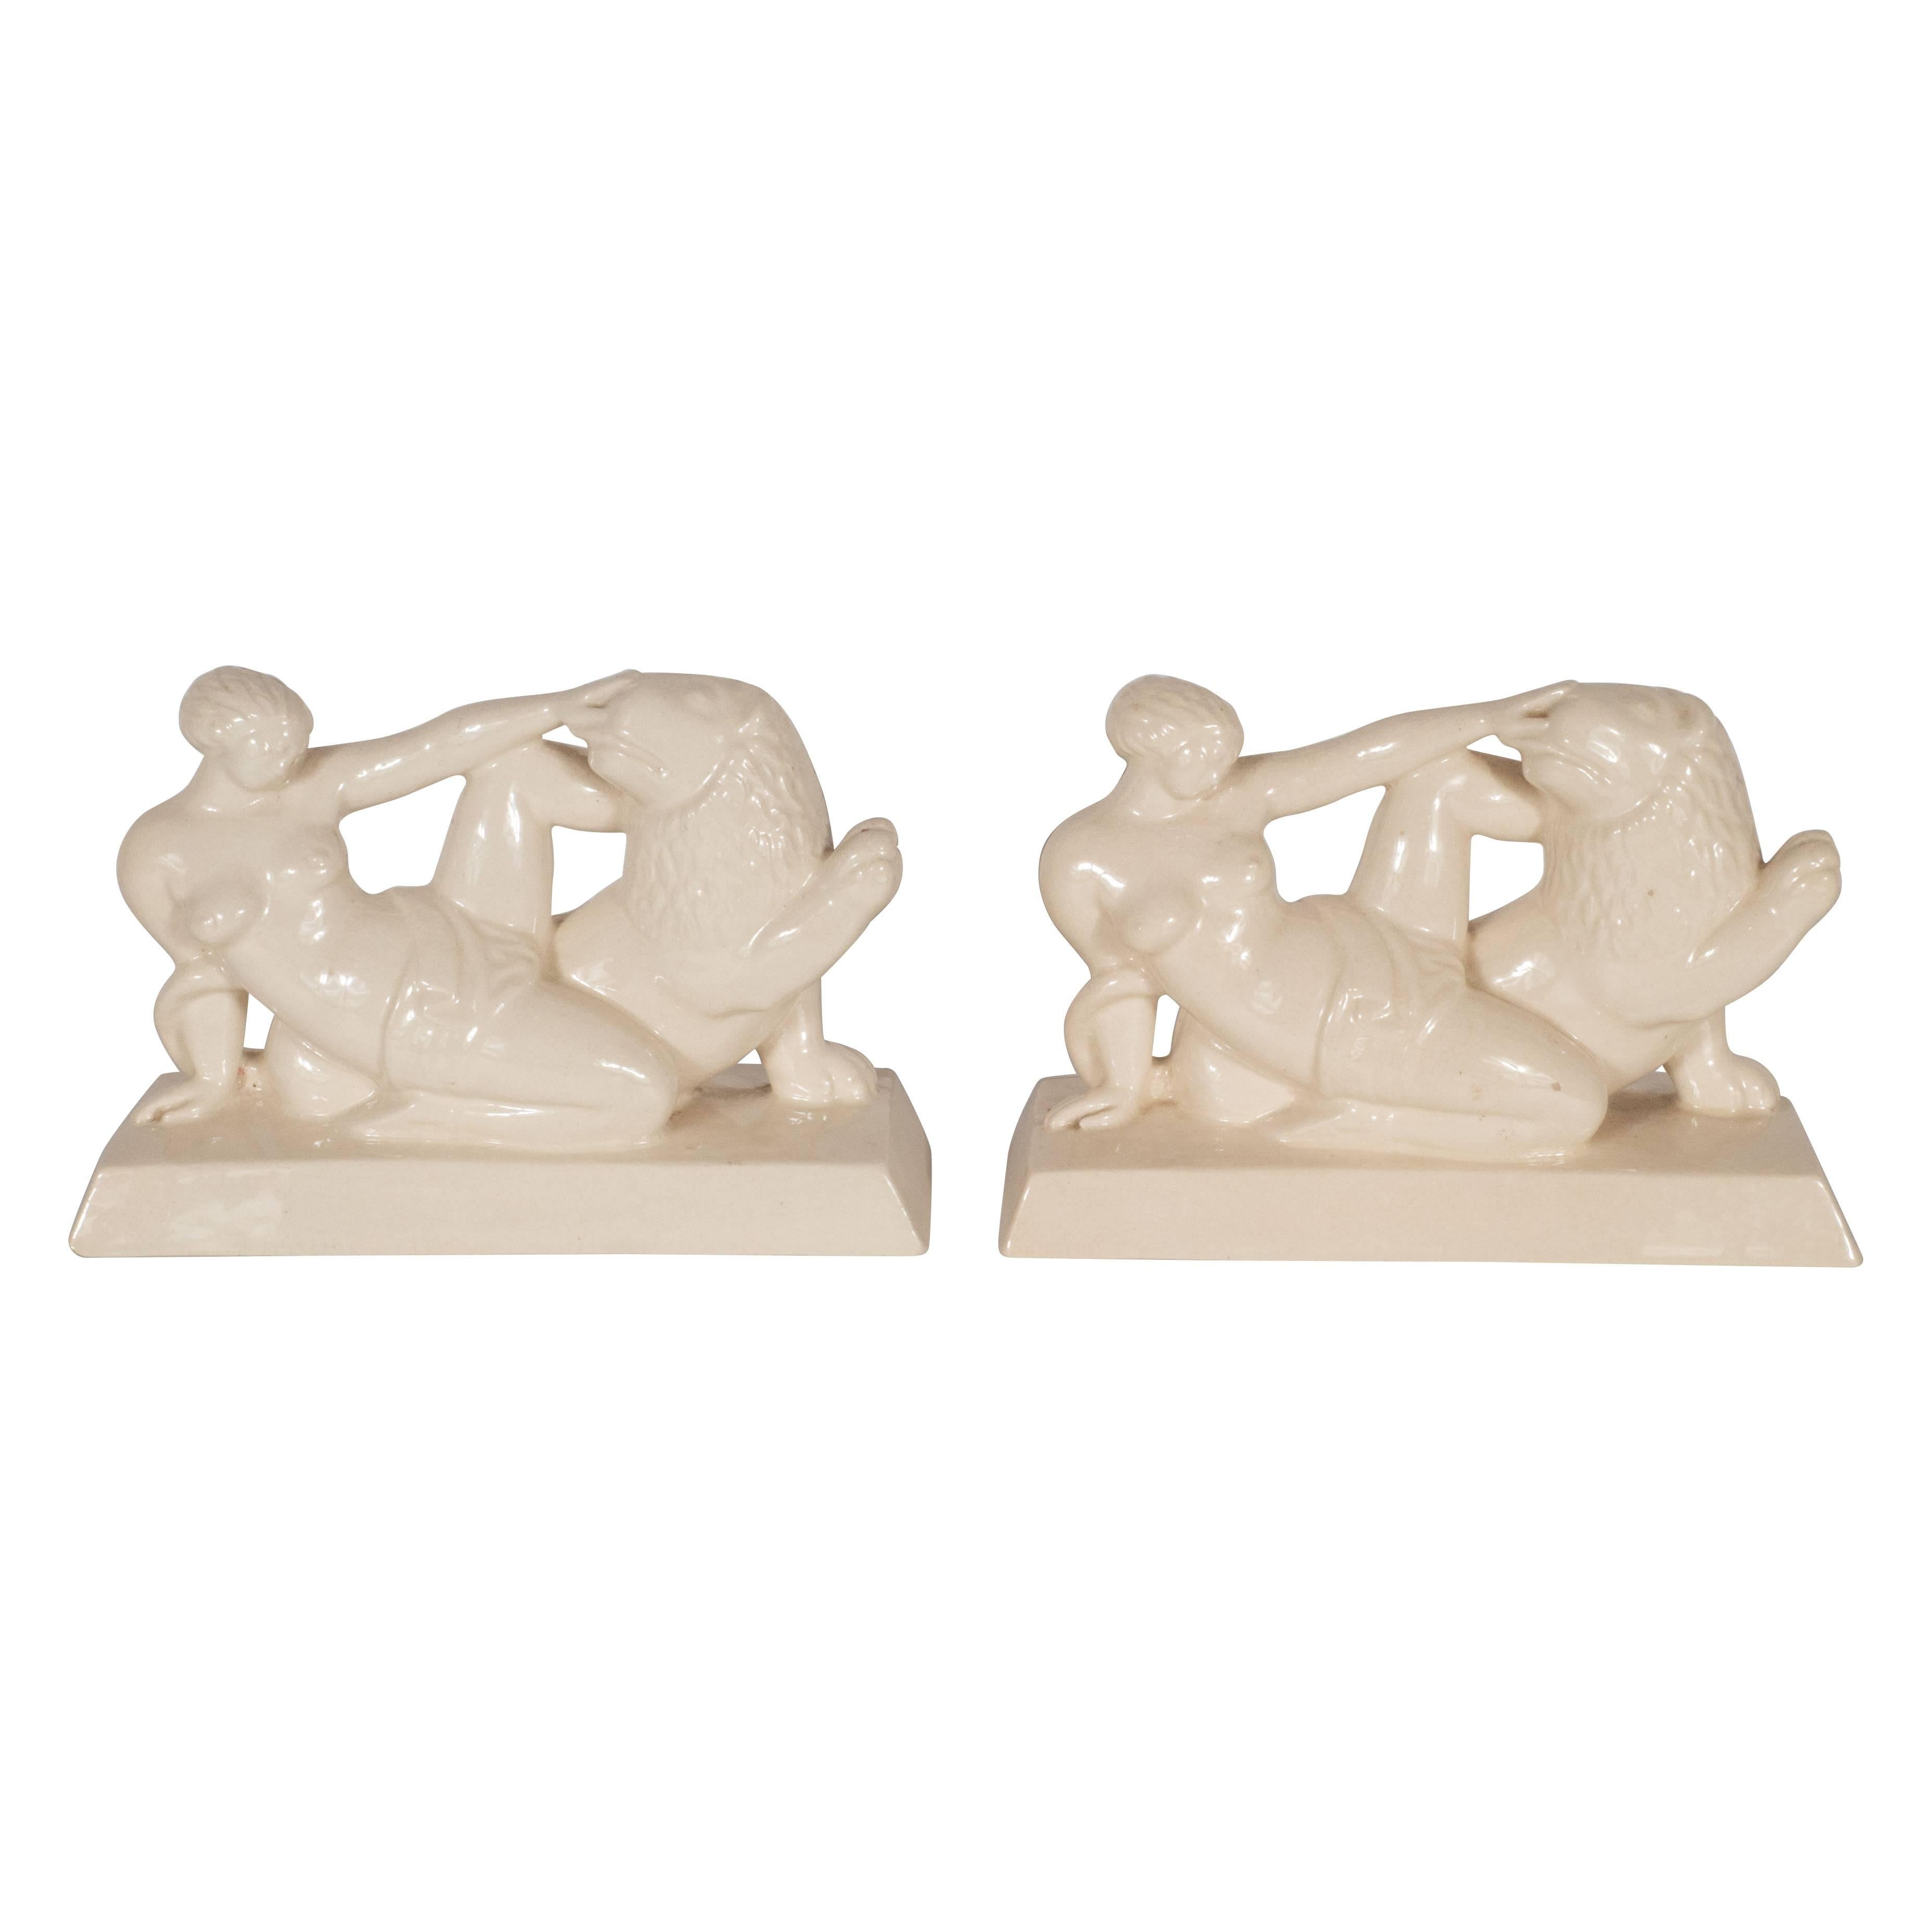 Art Deco Ceramic Book Ends Featuring Lion and Nude Female Figure